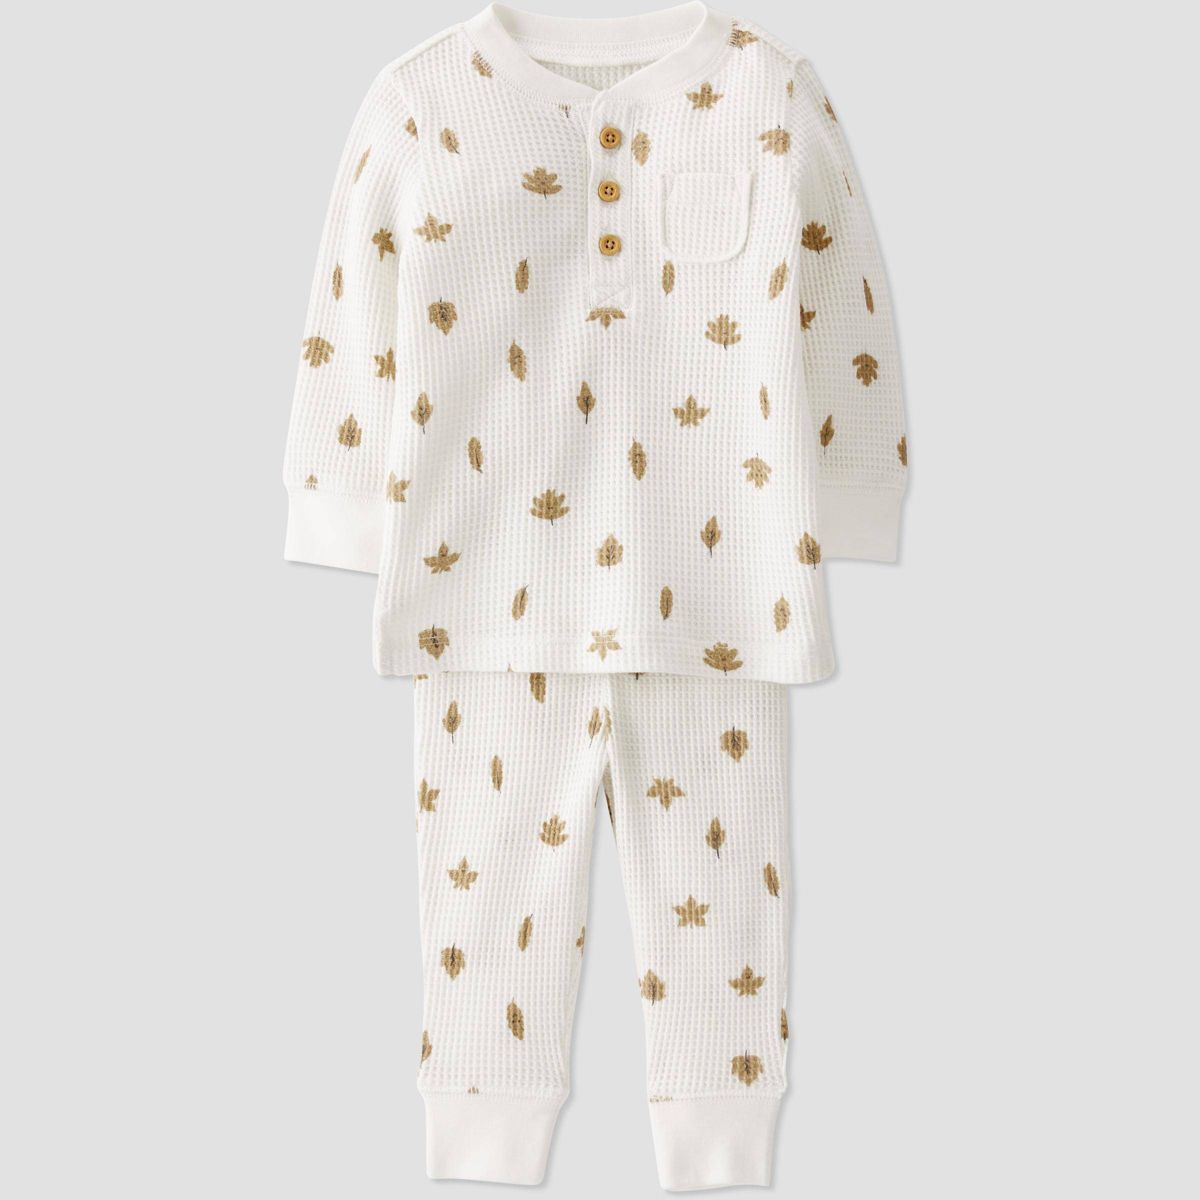 Little Planet by Carter’s Baby 2pc Leaf Print Top and Bottom Set - Off-White | Target